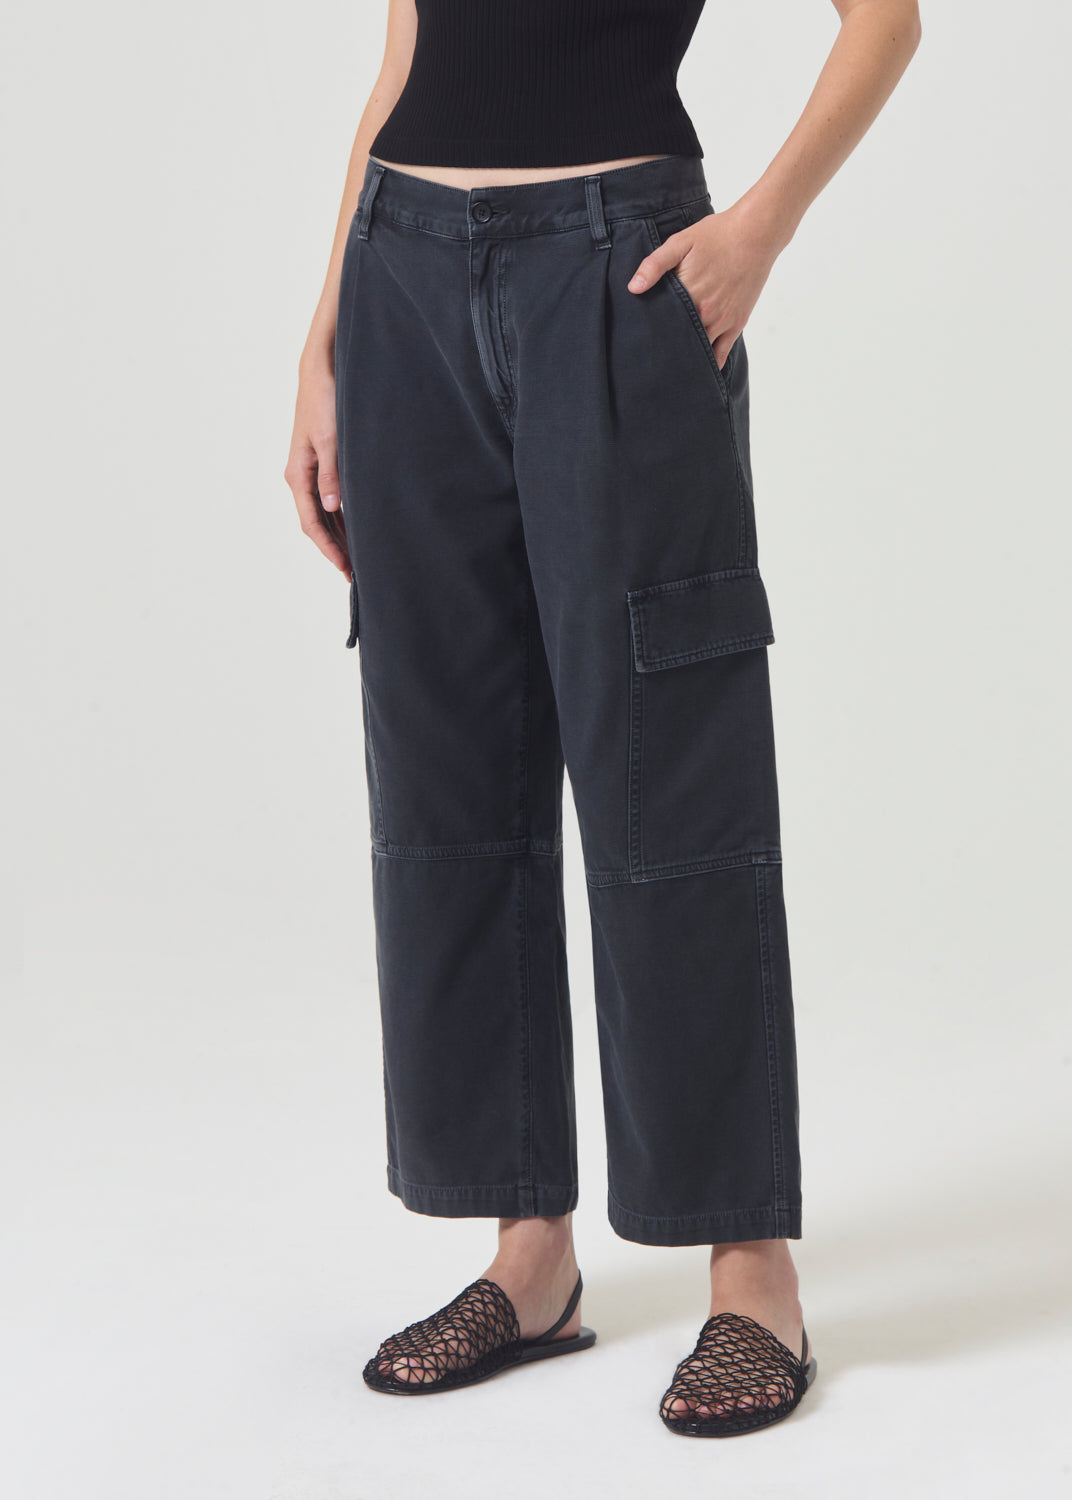 Jericho Pant in Vulture